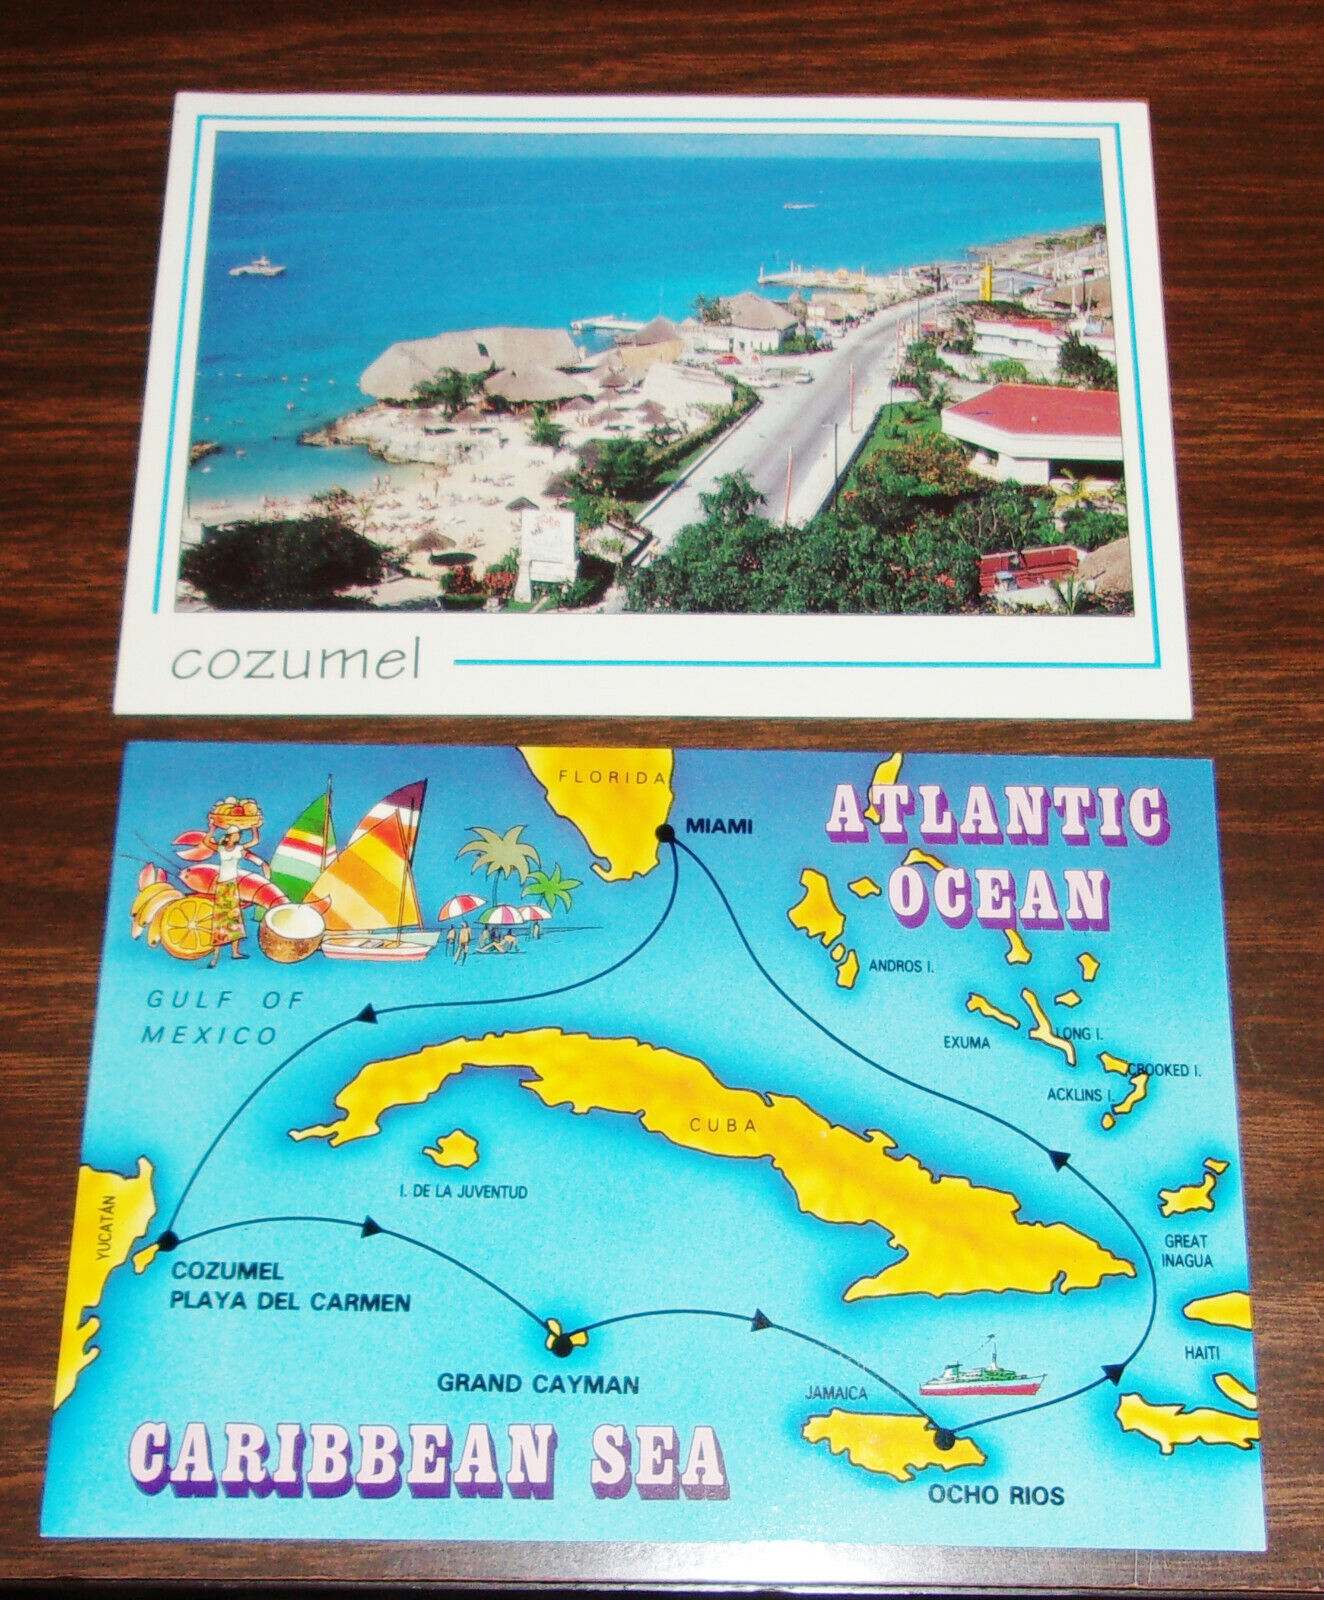 2 Postcards - UNUSED - 20 to 25 Yrs Old - Cozumel Mexico & Caribbean Sea